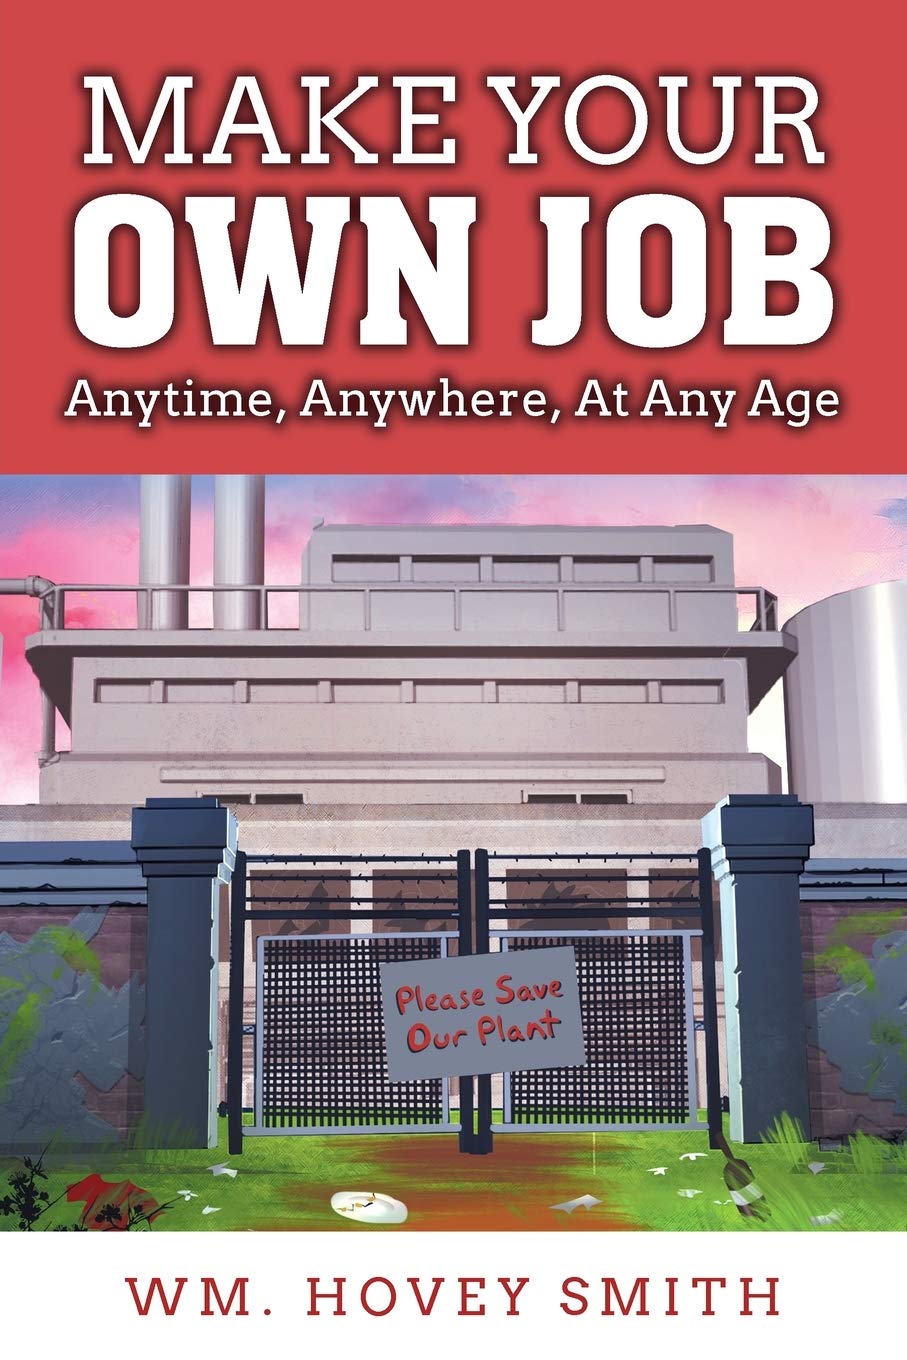 Wm. Hovey Smith Talks Wealth Creation in Make Your Own Job Alongside Author’s Tranquility Press